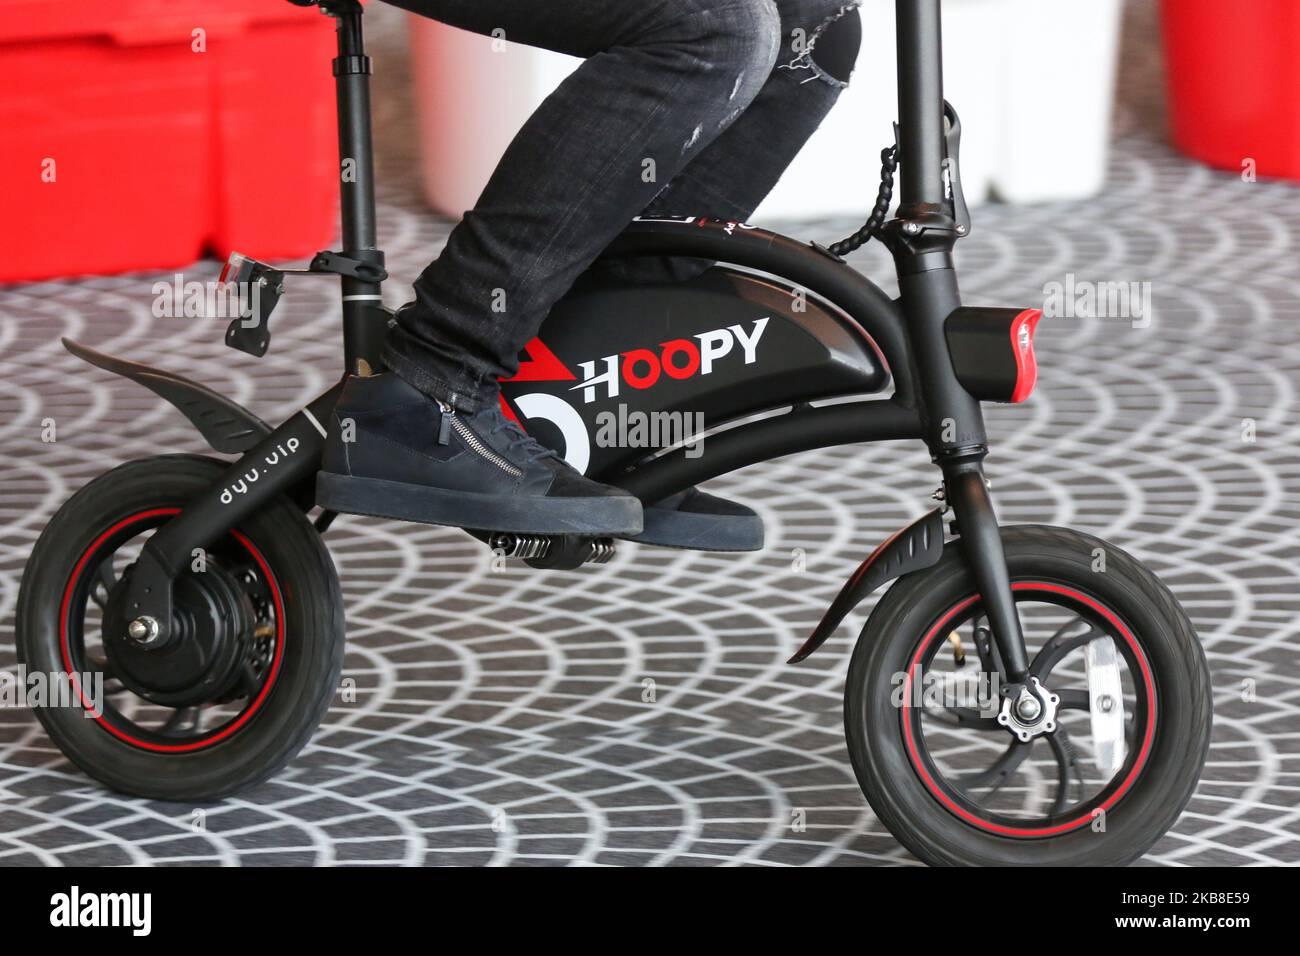 The French company Hoopy ebike exhibits an electric bike at the Autonomy and Urban Mobility show, in Paris on October 16, 2019. (Photo by Michel Stoupak/NurPhoto) Stock Photo